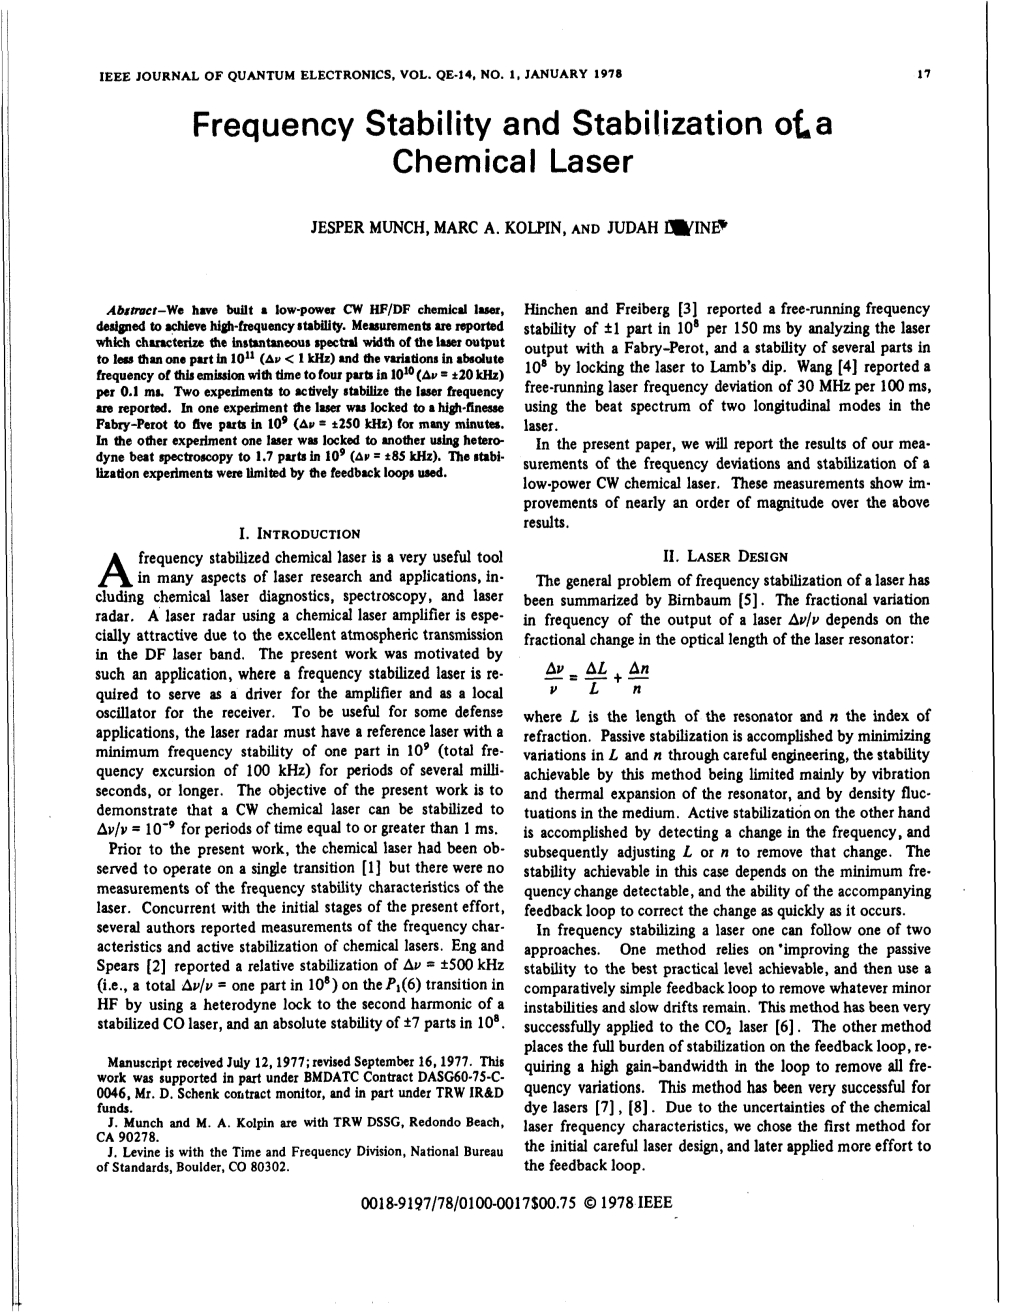 Frequency Stability and Stabilization Ola Chemical Laser